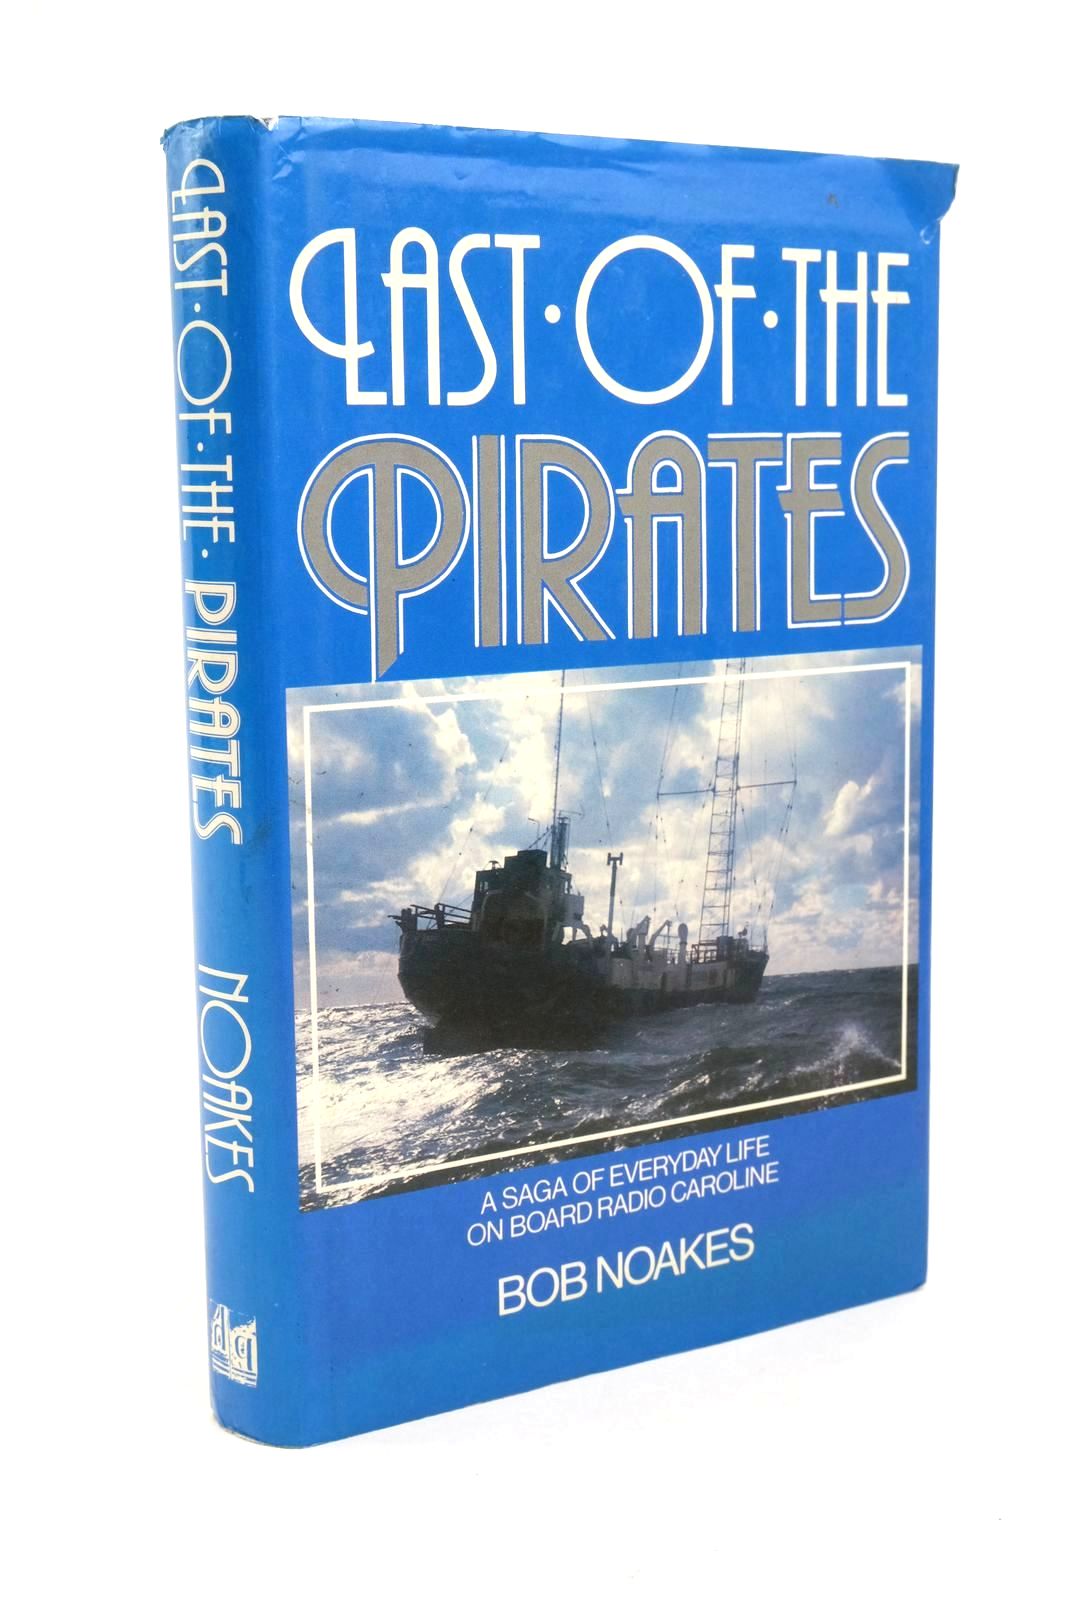 Photo of LAST OF THE PIRATES written by Noakes, Bob published by Paul Harris Publishing (STOCK CODE: 1322305)  for sale by Stella & Rose's Books